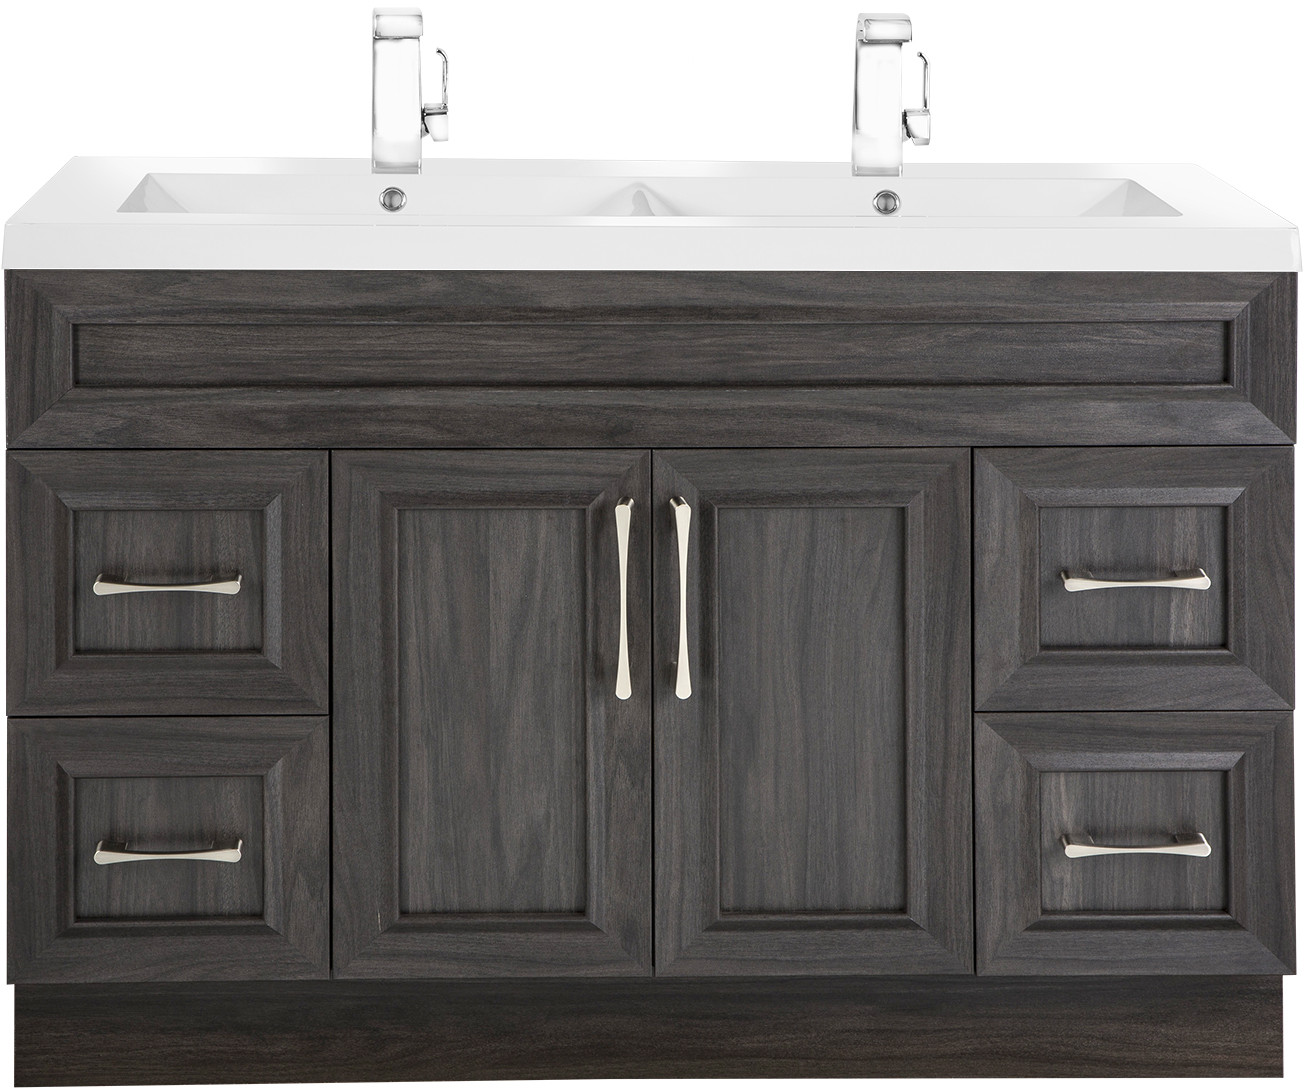 48 Inch Freestanding Double Bowl Vanity, Can A 48 Vanity Have 2 Sinks